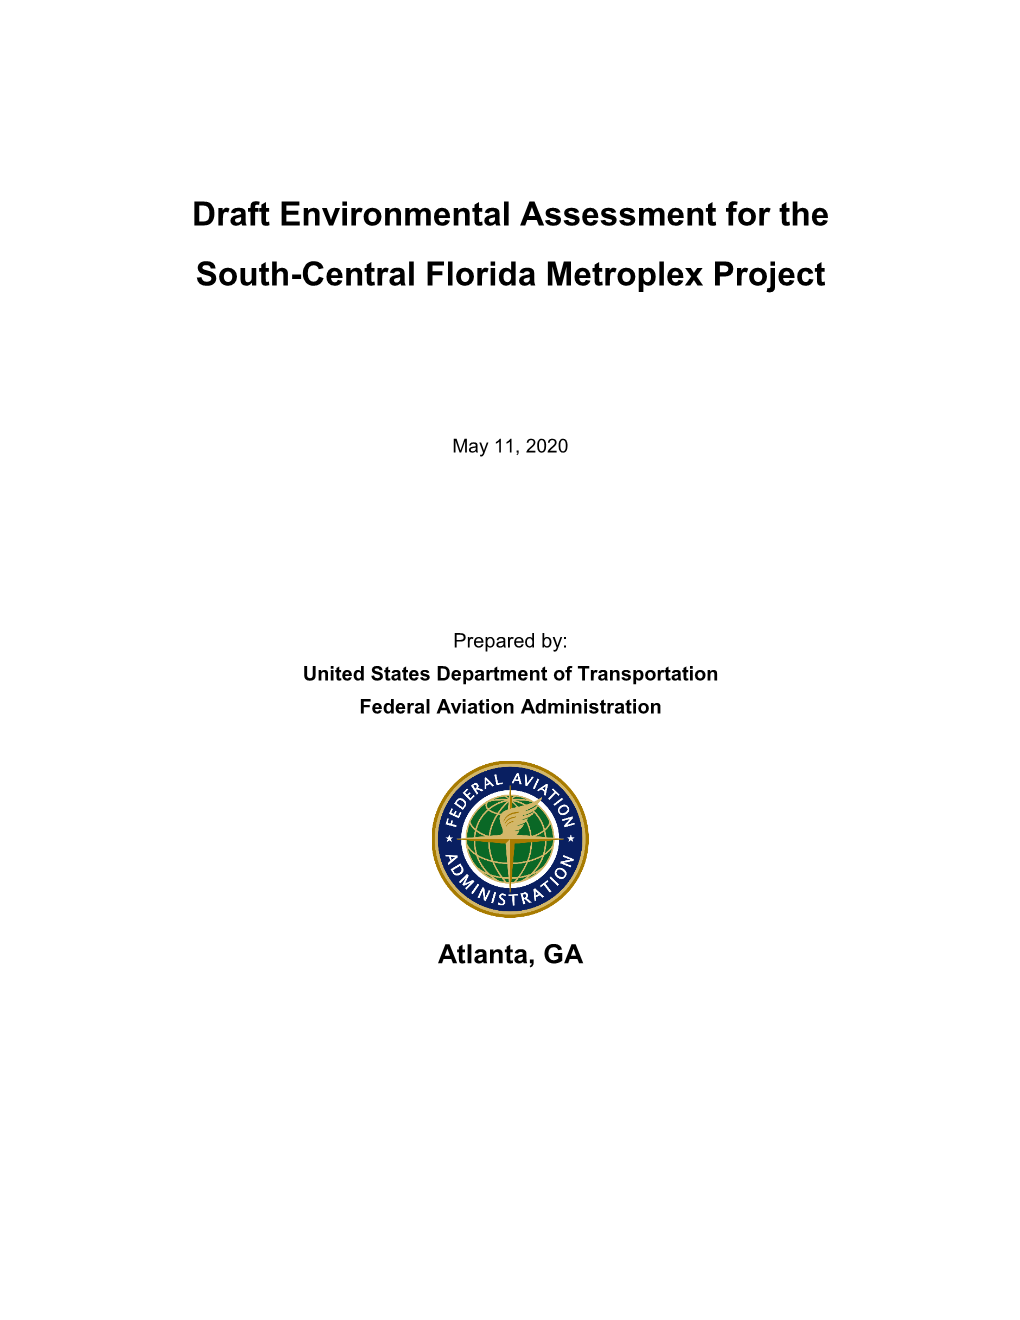 Draft Environmental Assessment for the South-Central Florida Metroplex Project